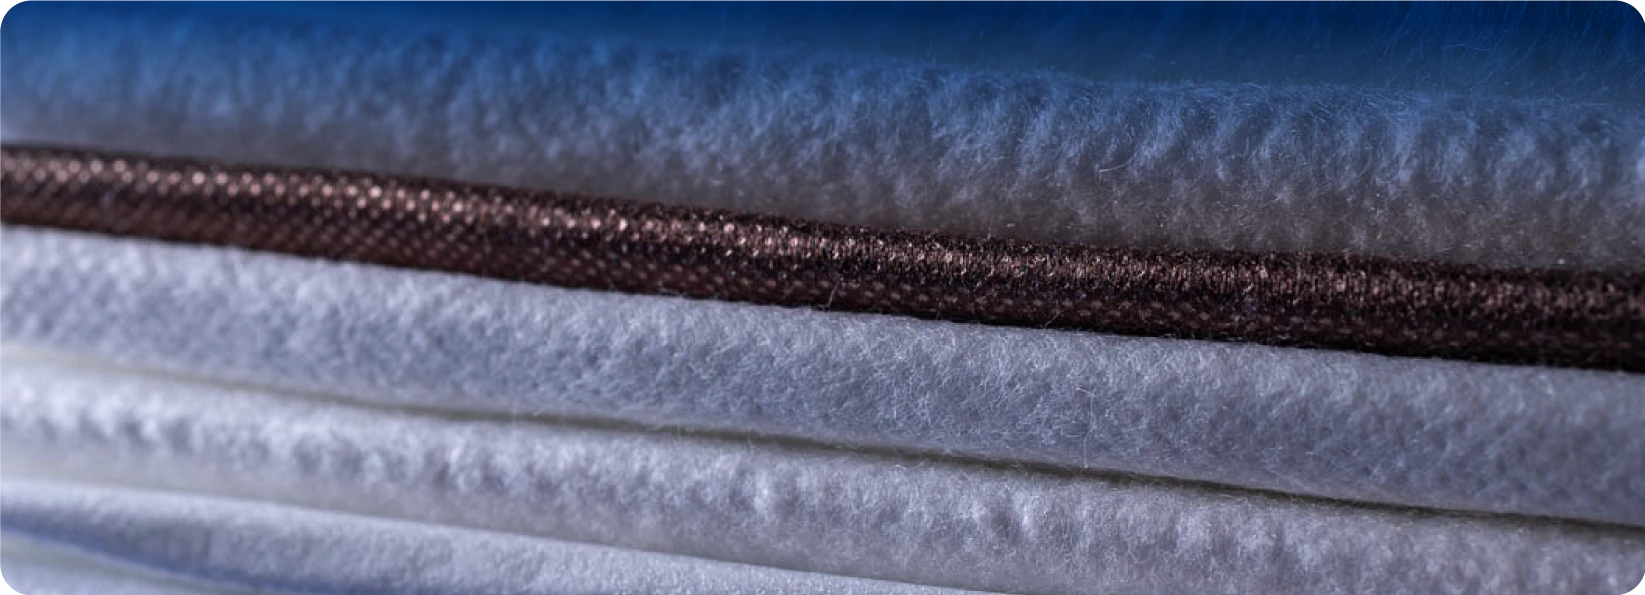 Suppliers Of Superabsorbent Fabrics Lincolnshire